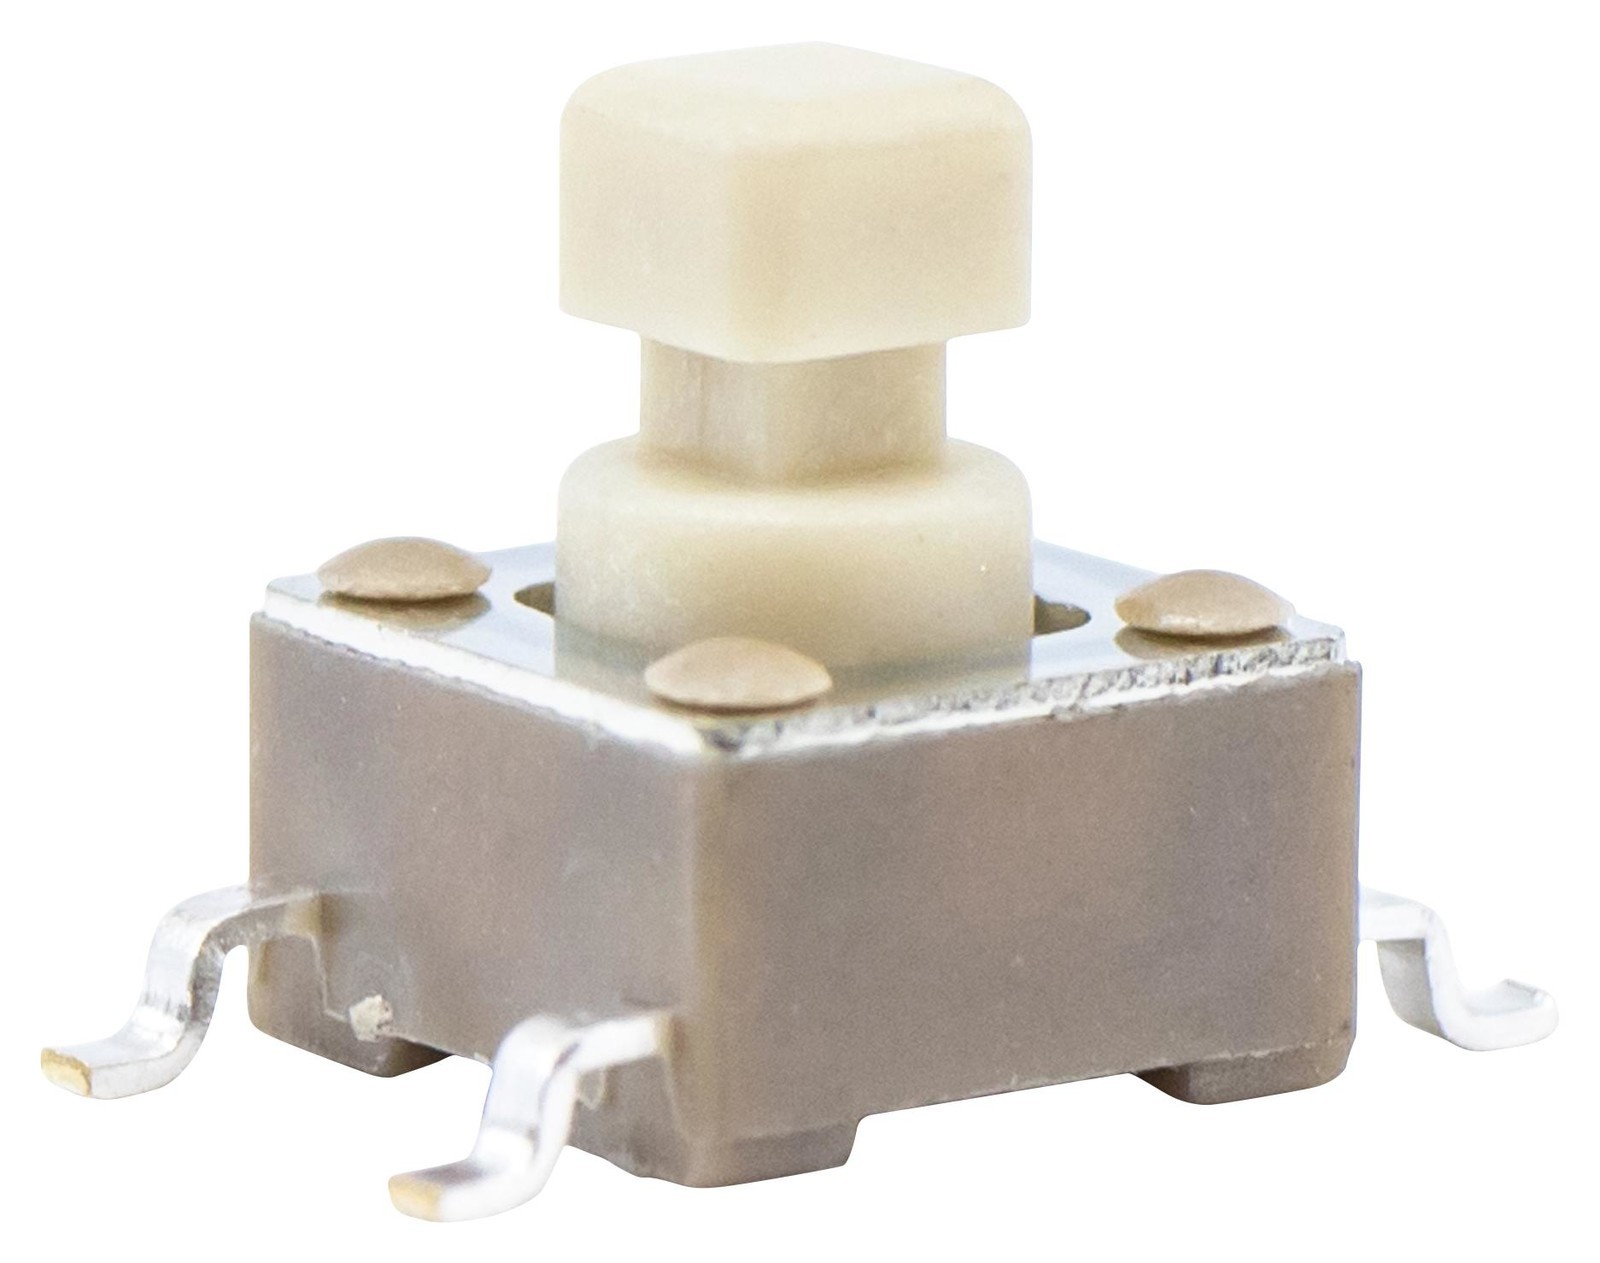 E-Switch Tl3301Spf260Qg Tactile Switch, 0.05A, 12Vdc, 260Gf, Smd